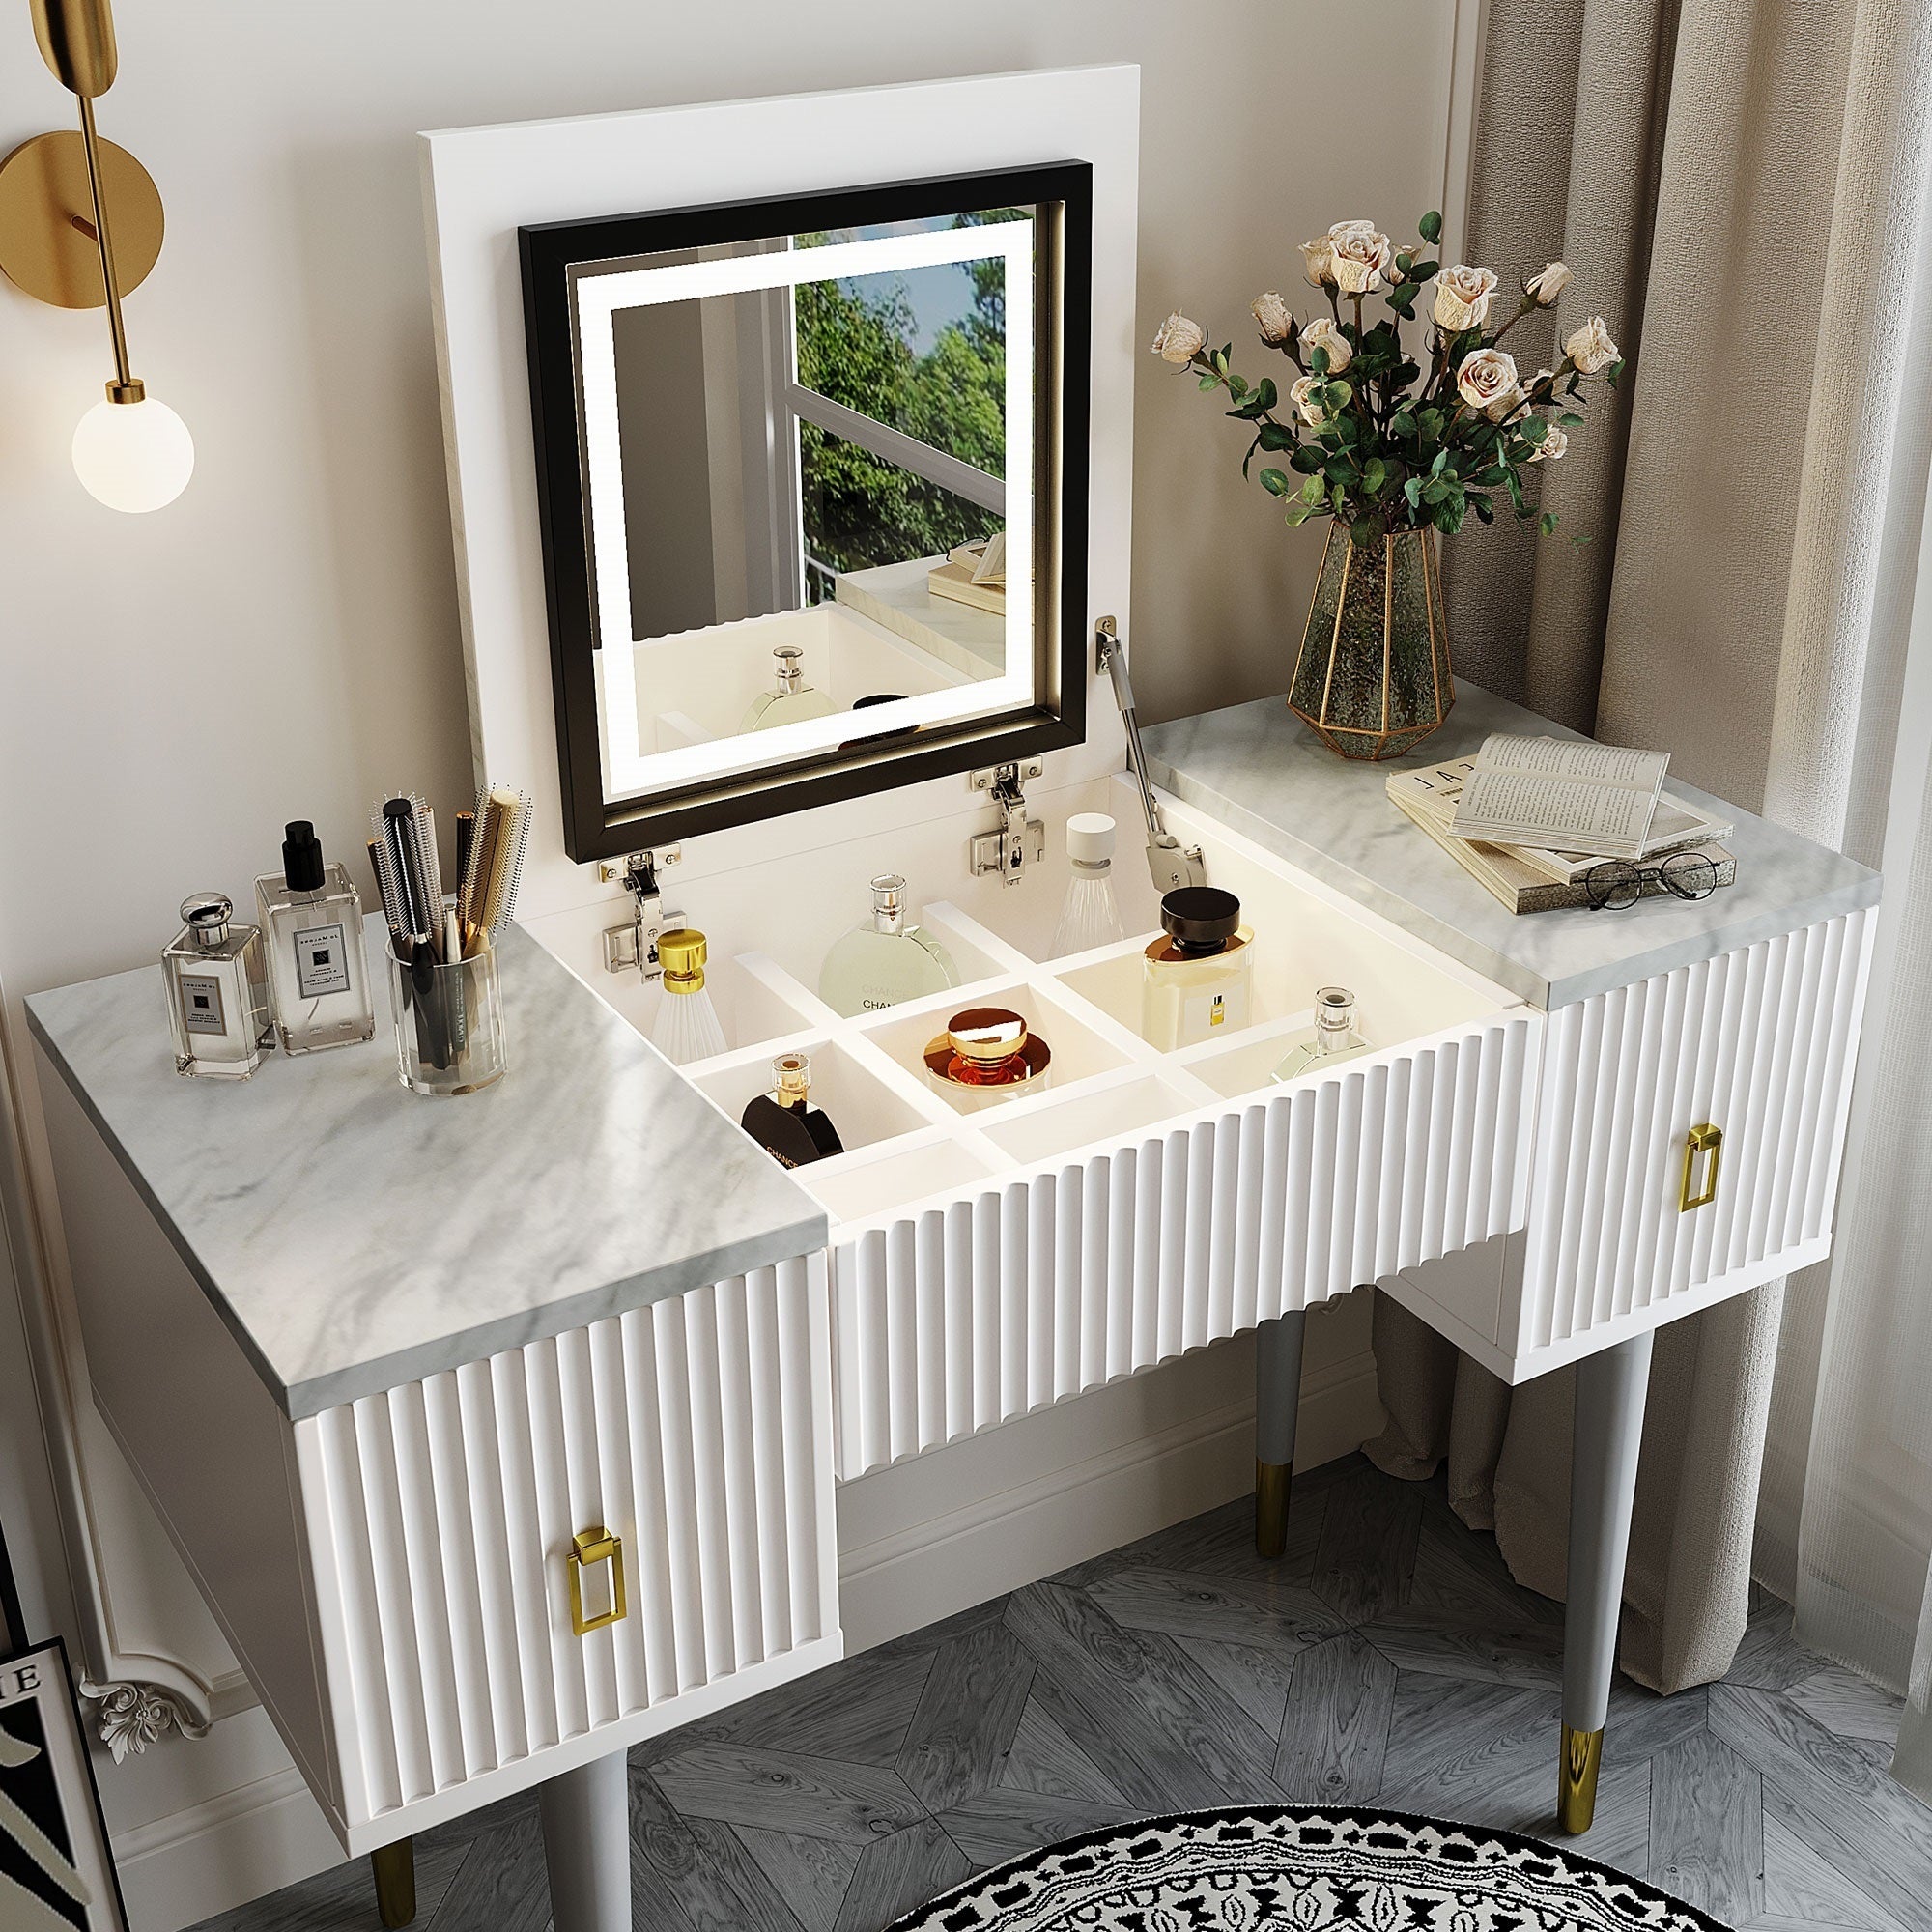 43.3" White Modern Vanity Table Set with Flip-top Mirror and LED Light